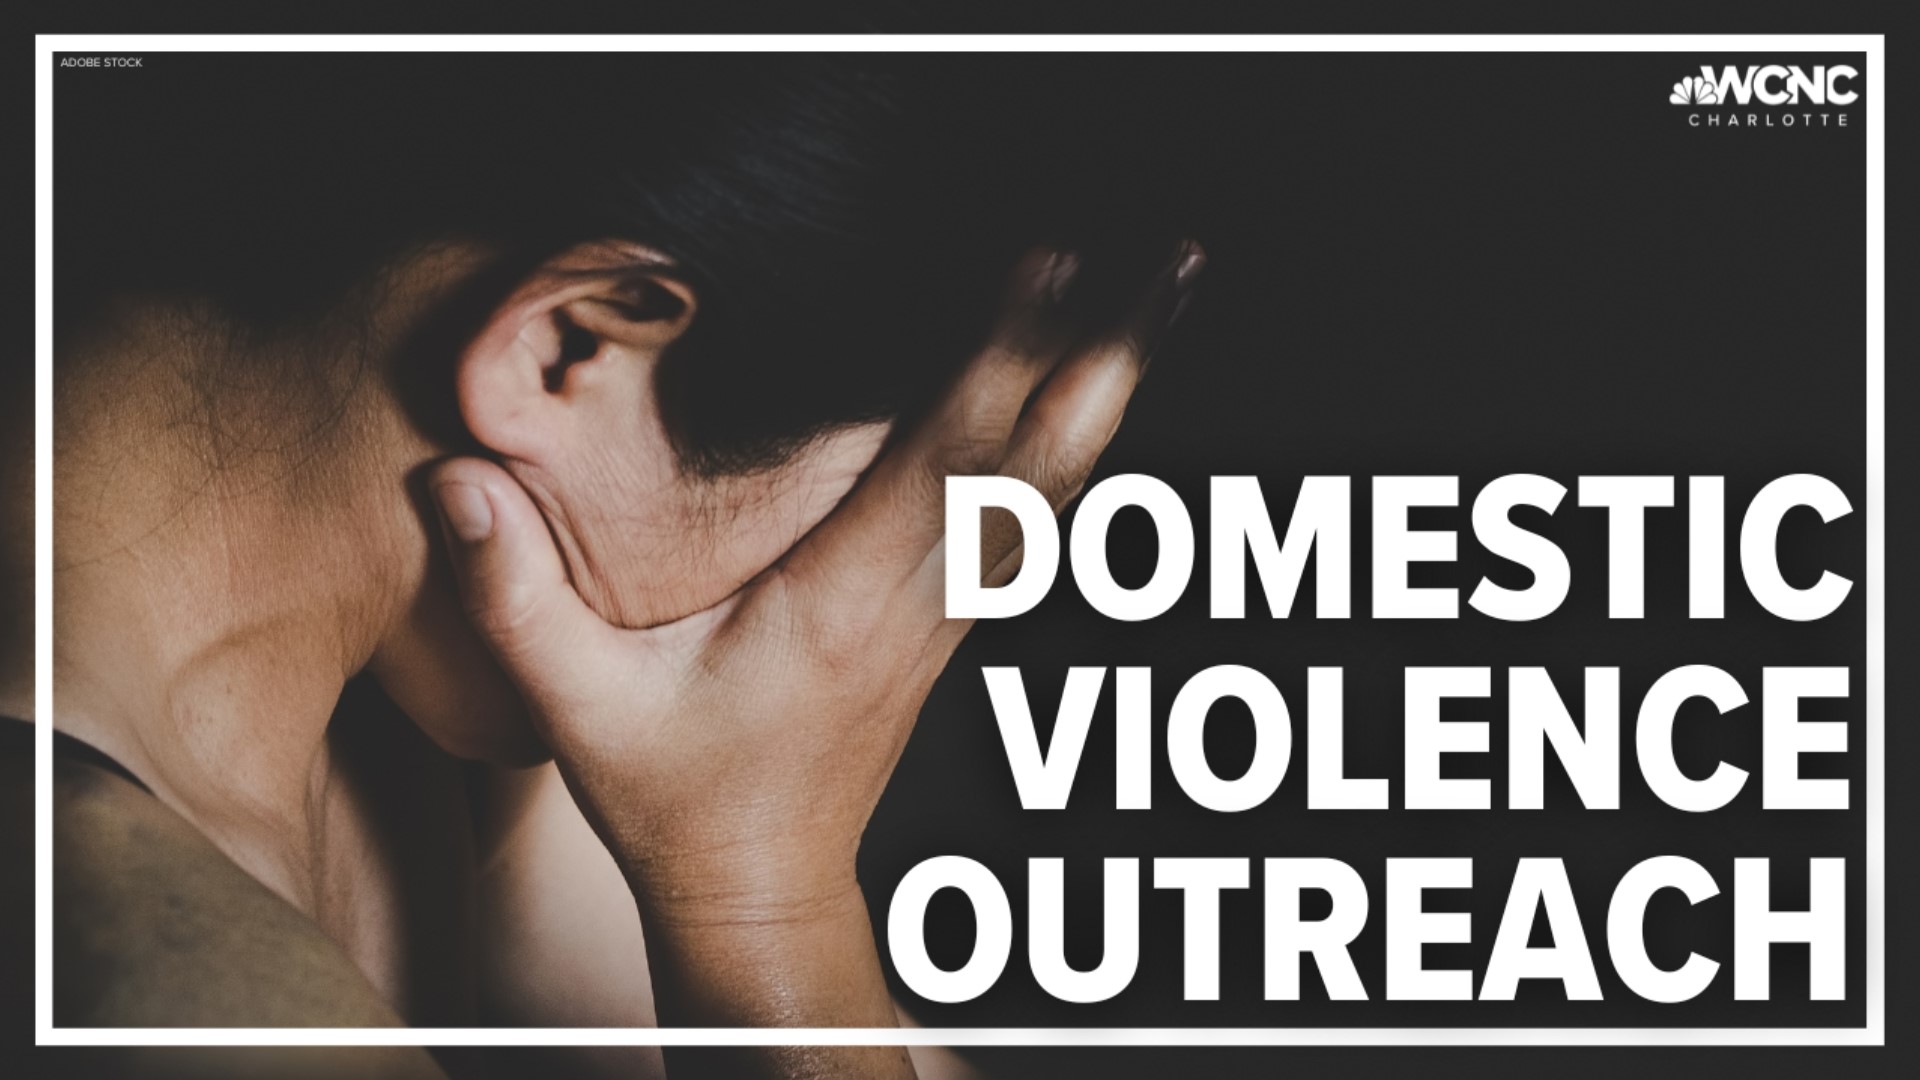 If you or a loved one is facing domestic violence, help is available. You can call the National Domestic Violence Hotline at 800-799-7233 or text START to 88788.